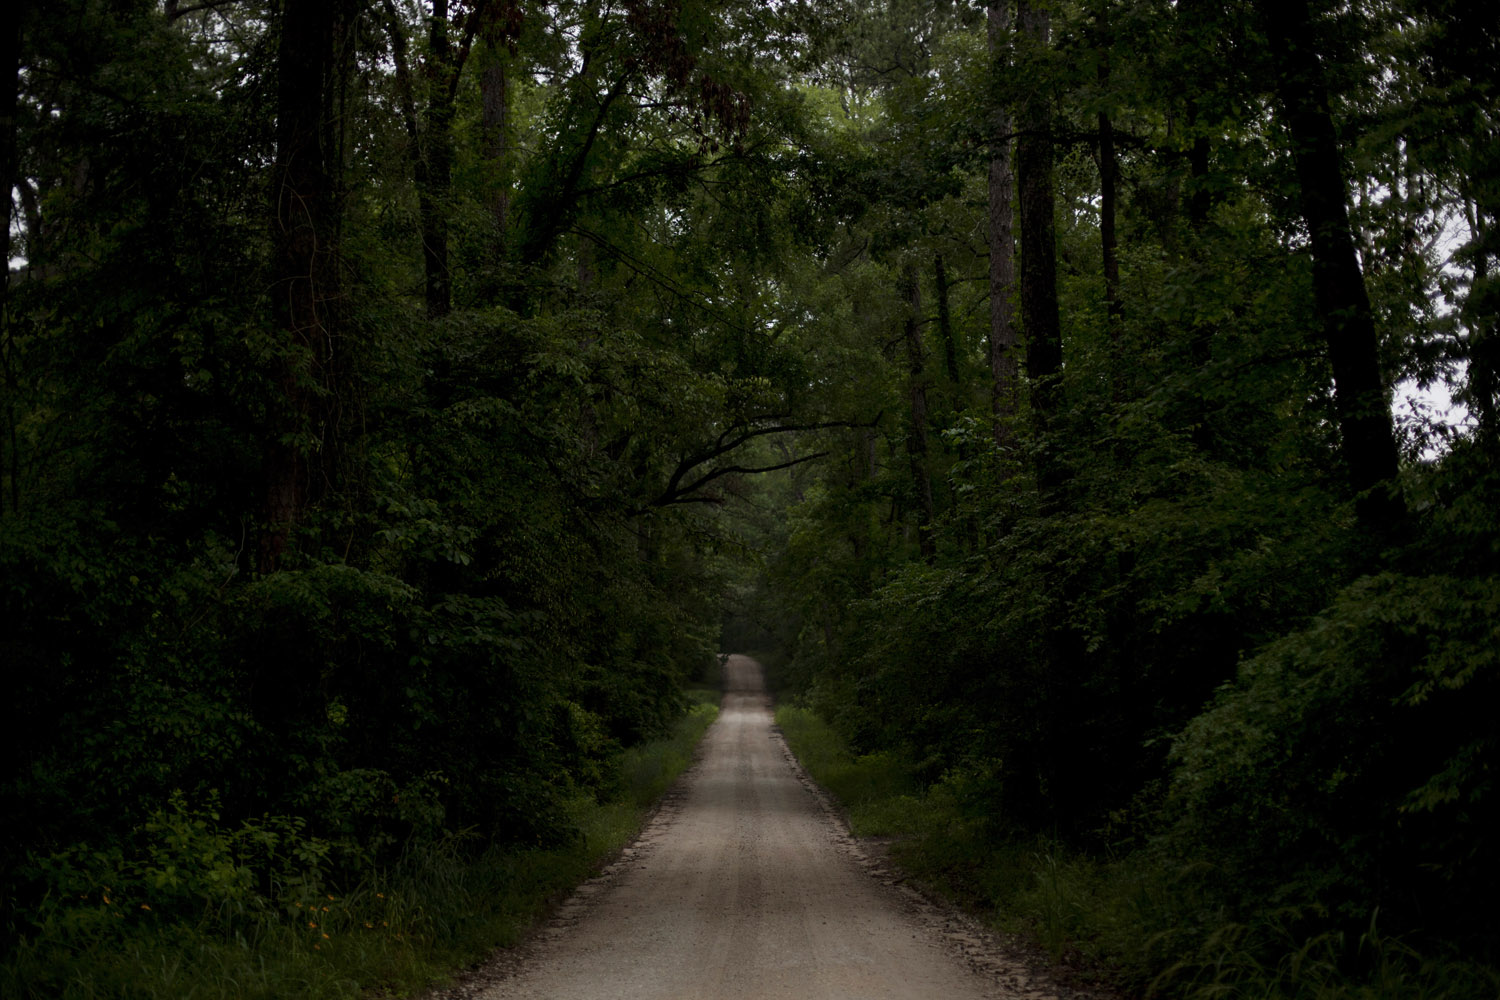 The Karolyi's training center is located at the end of  a long dirt road that winds through forest where deer and wild boars roam, outside of Houston.